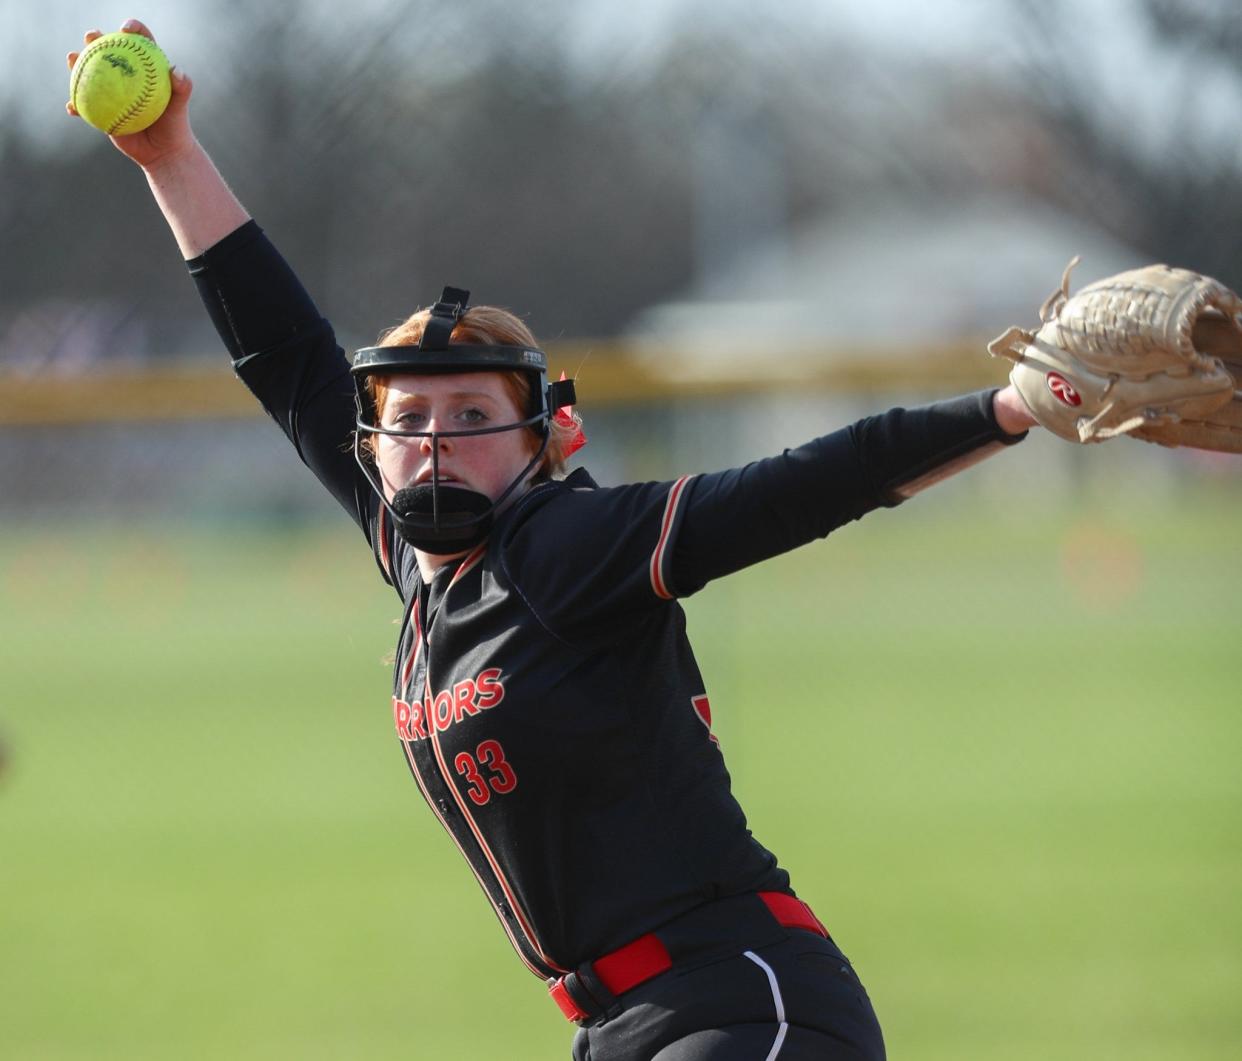 Pitcher Olivia Scholl is one of two senior leaders for a young Worthington Christian softball team, along with shortstop/second baseman Paige Tomallo.